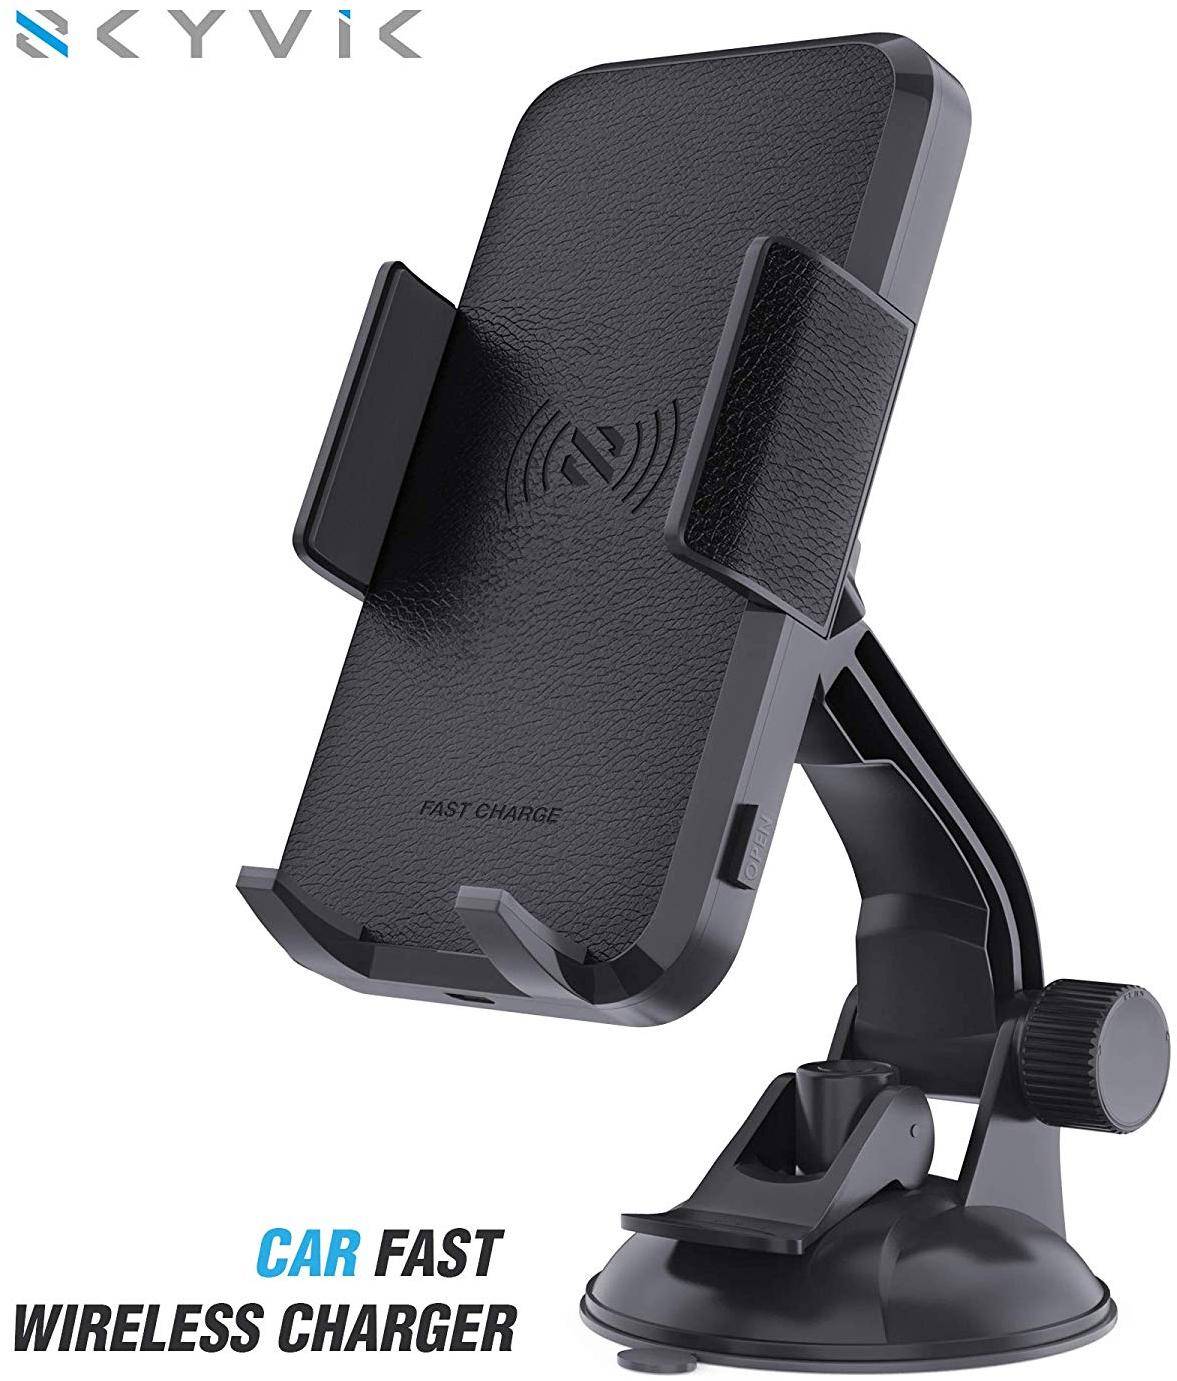 SKYVIK Beam Go Car Wireless Charger with Car Mount Stand zoom image